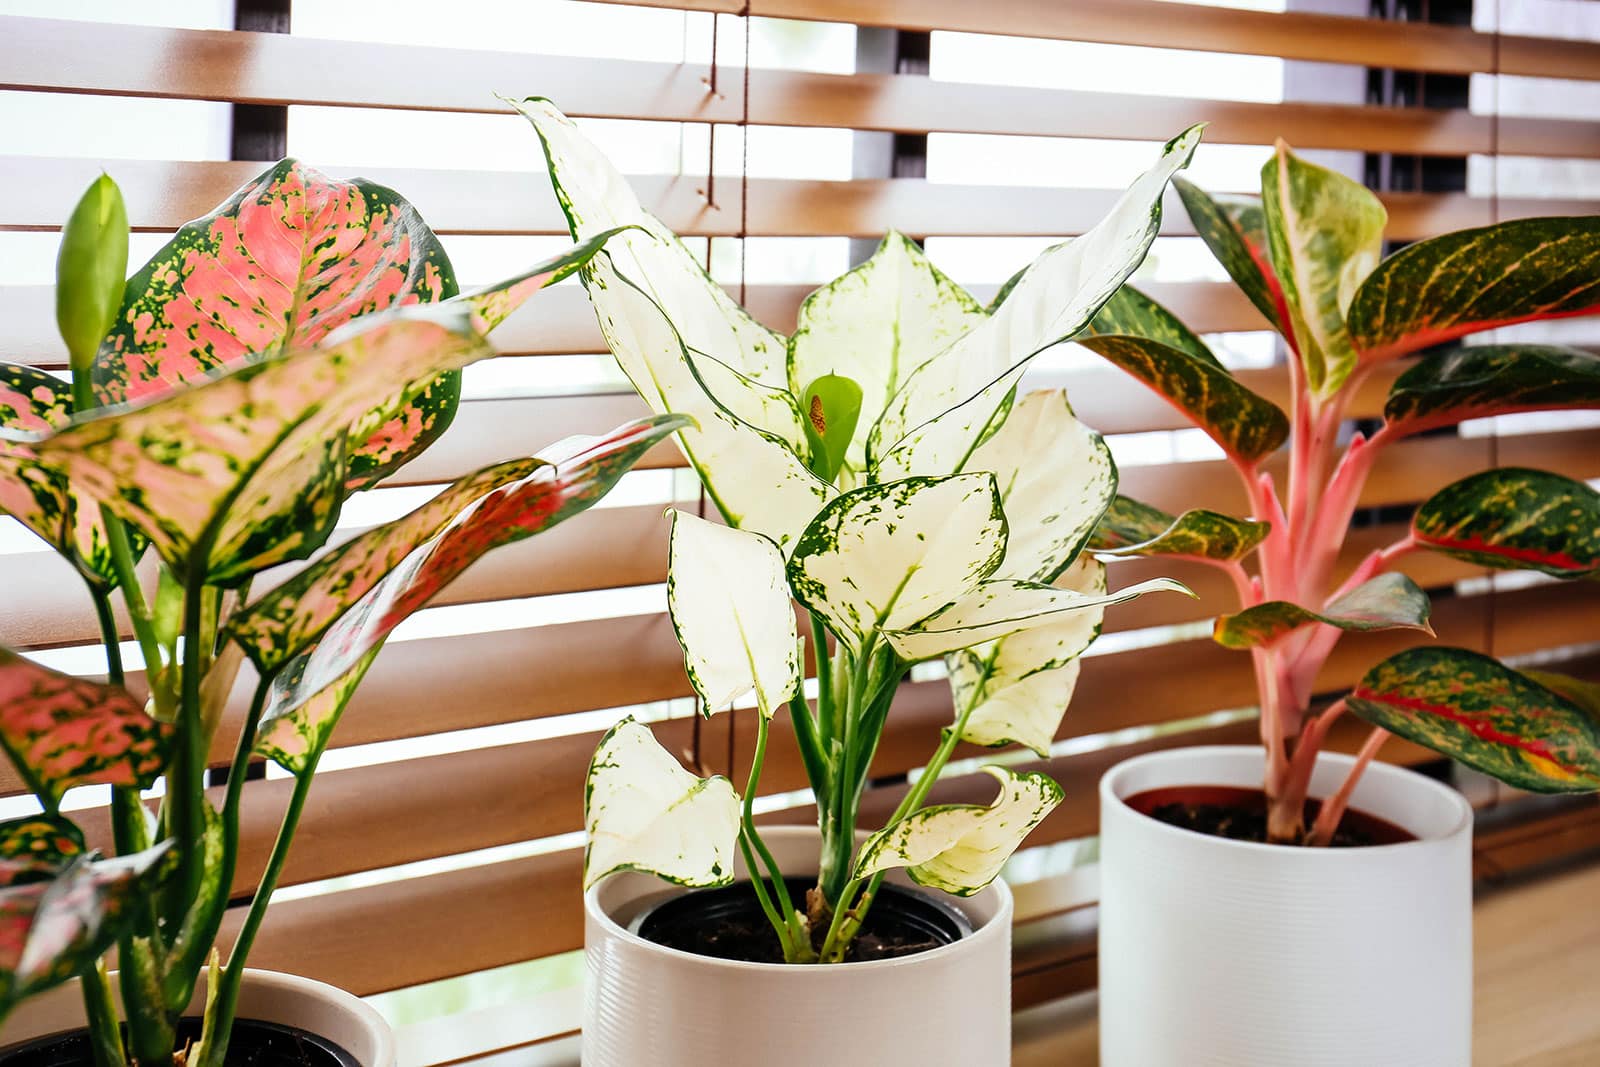 Group of three small Chinese evergreen plants in different colors, growing in white pots and placed against a window with brown blinds